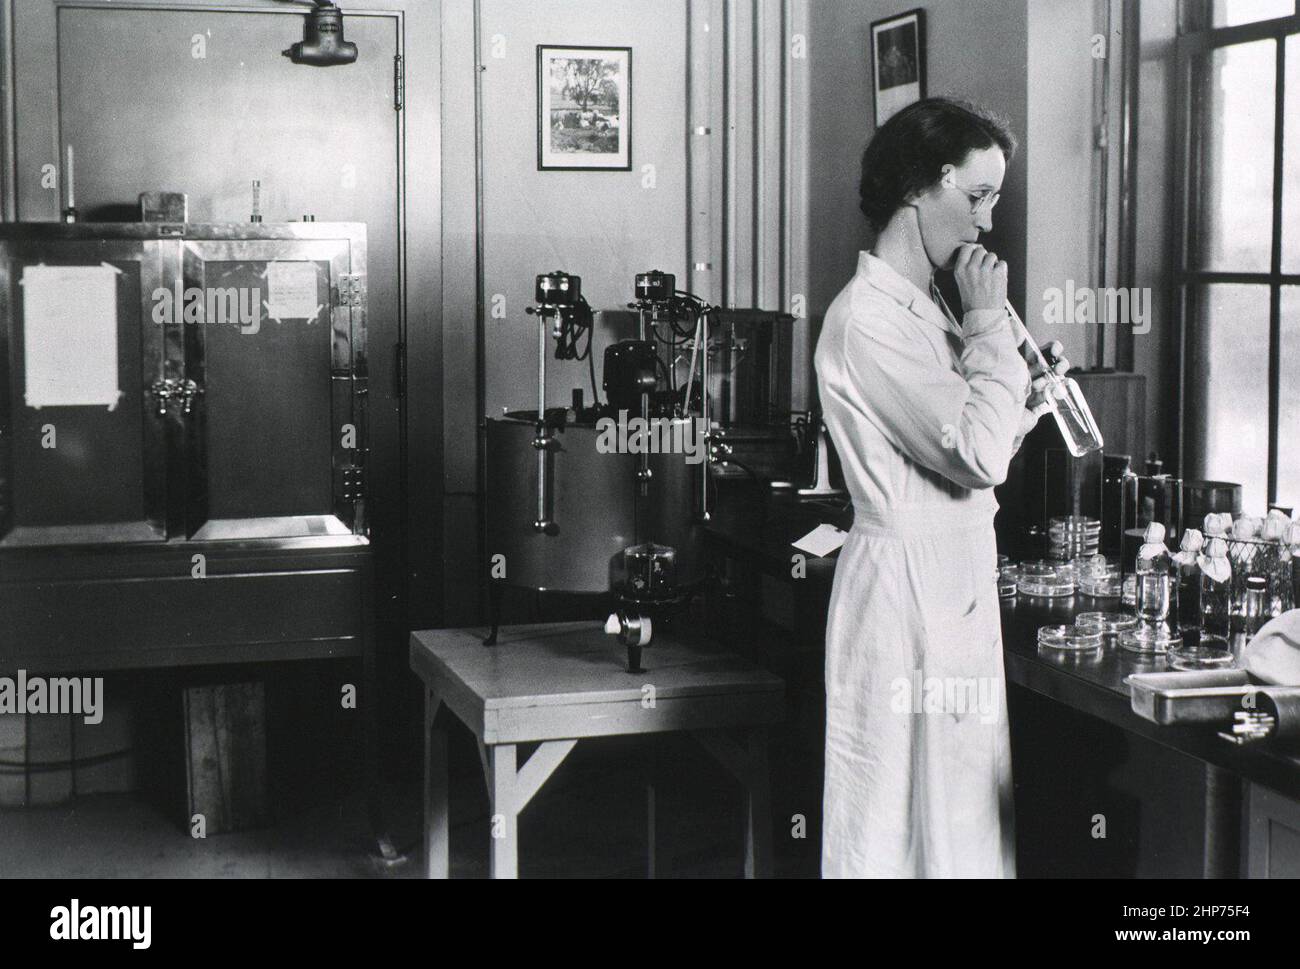 Trained in the bacteriological methods of the time (1938), Verder studied gastrointestinal flora and staphylococci and trained NIH staff in bacteriological methods.  In 1962, she became chief of the Bacteriology and Mycology Branch of the NIAID Extramural program.  She retired in 1970. Stock Photo